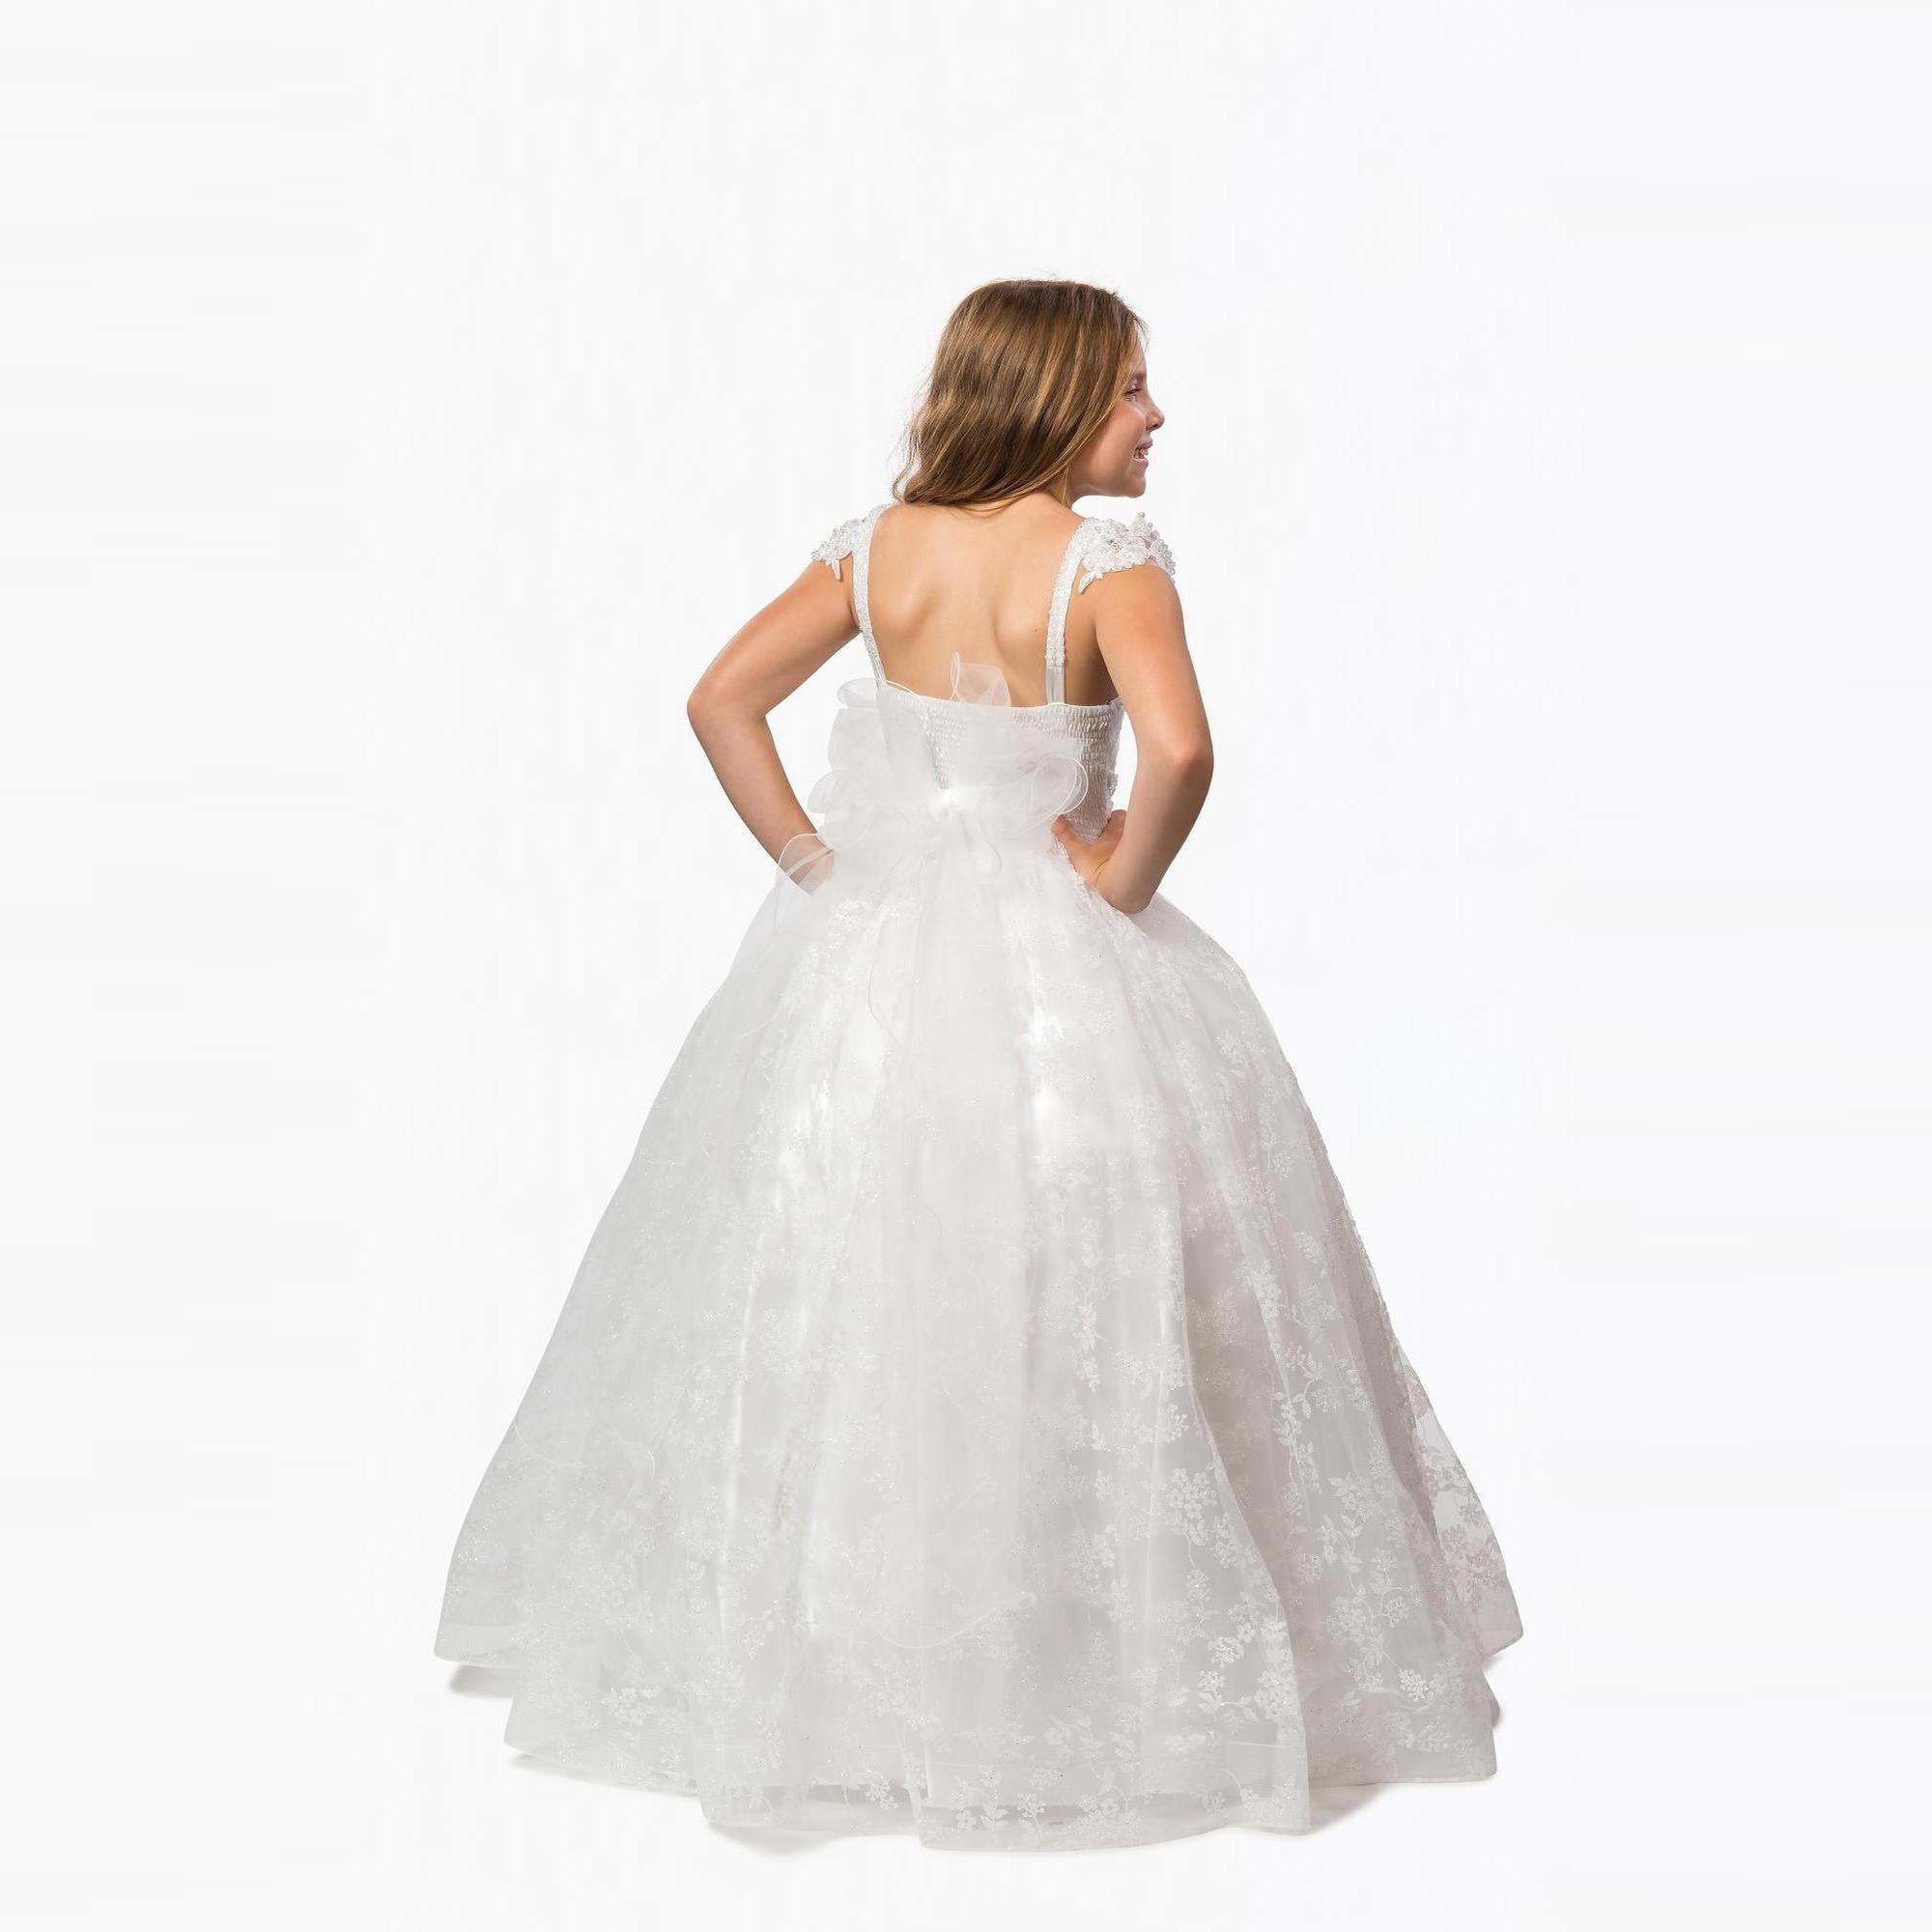 Olivia's Gown Girls Formal Dress